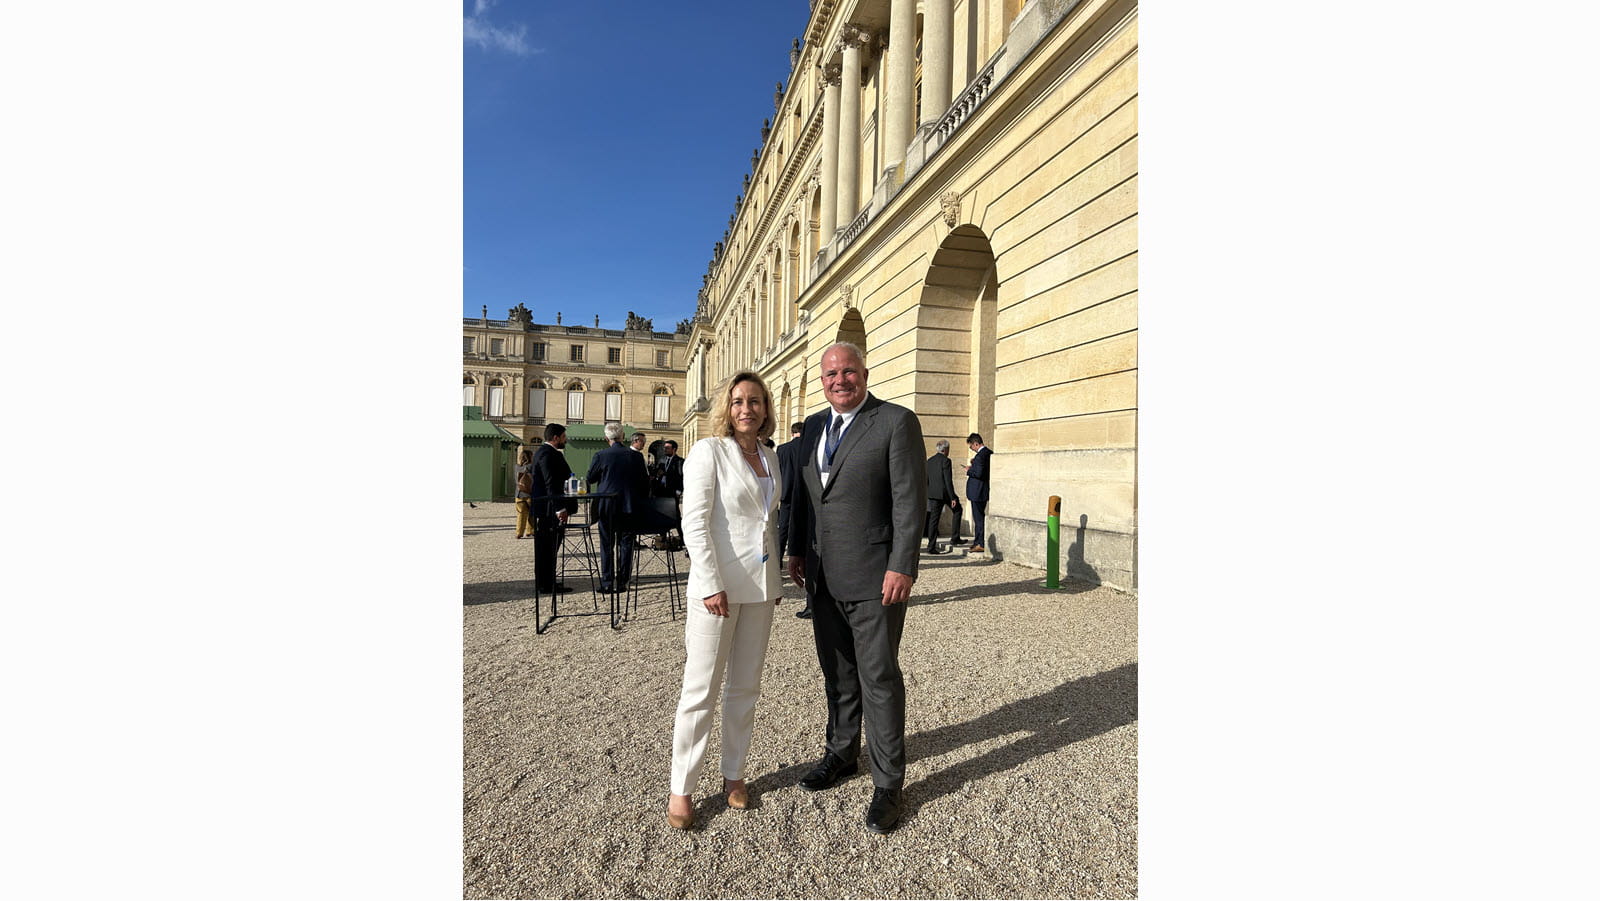 CSL Senior Vice President and Head of Global Regulatory Affairs Emmanuelle Lecomte-Brisset and CSL CEO Paul McKenzie outside of Versailles Palace